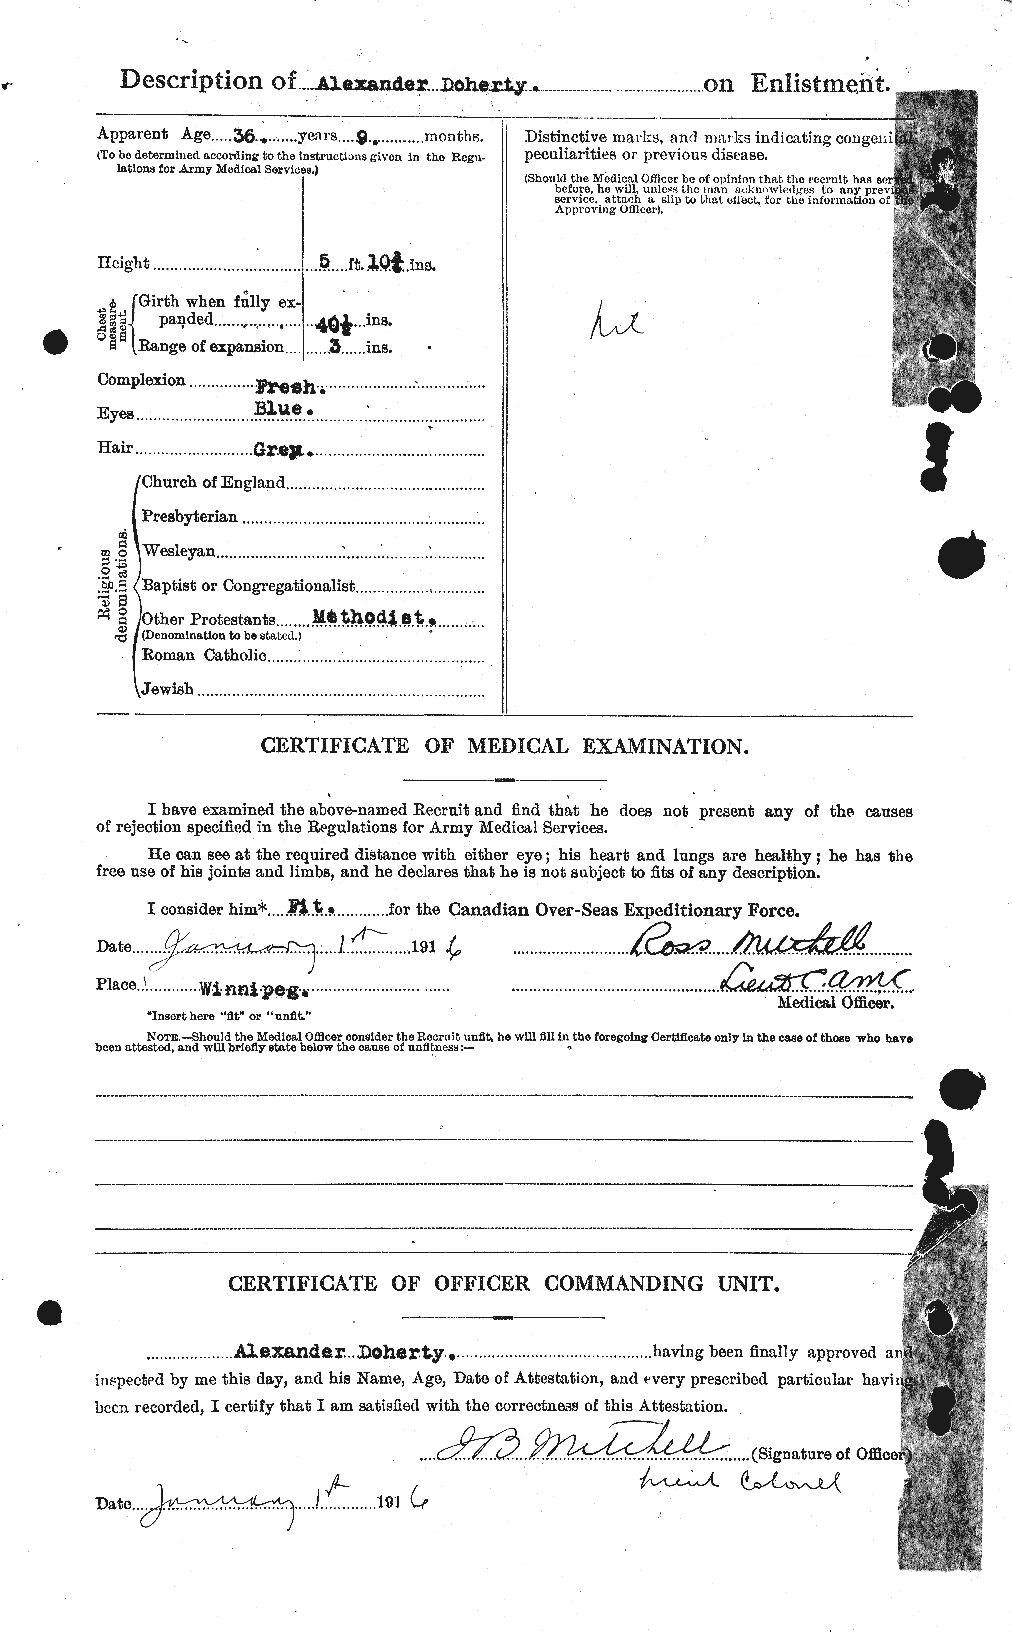 Personnel Records of the First World War - CEF 297493b